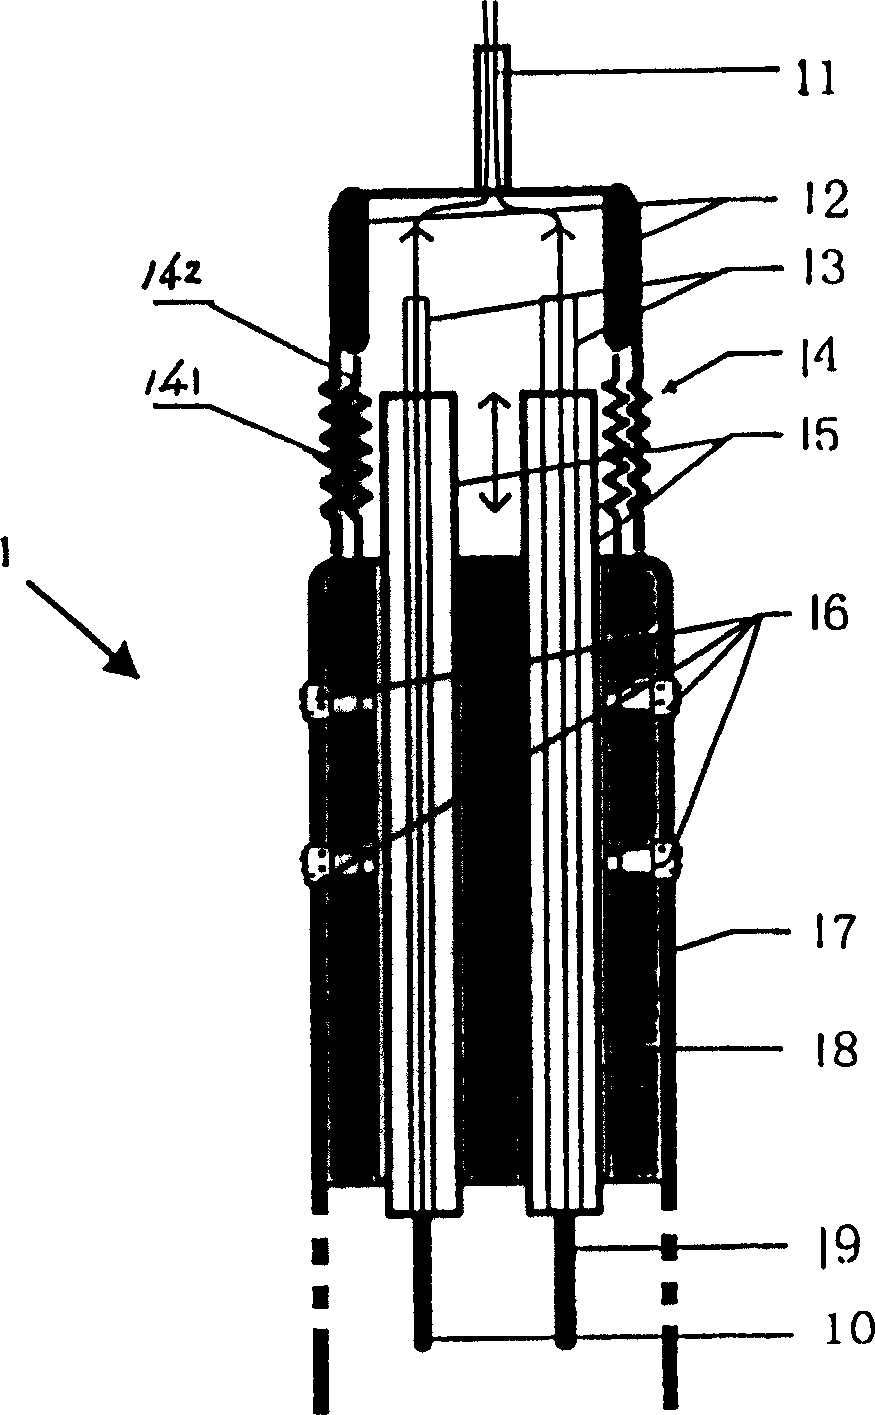 Sensor for measuring content of sulfate reducing bacteria